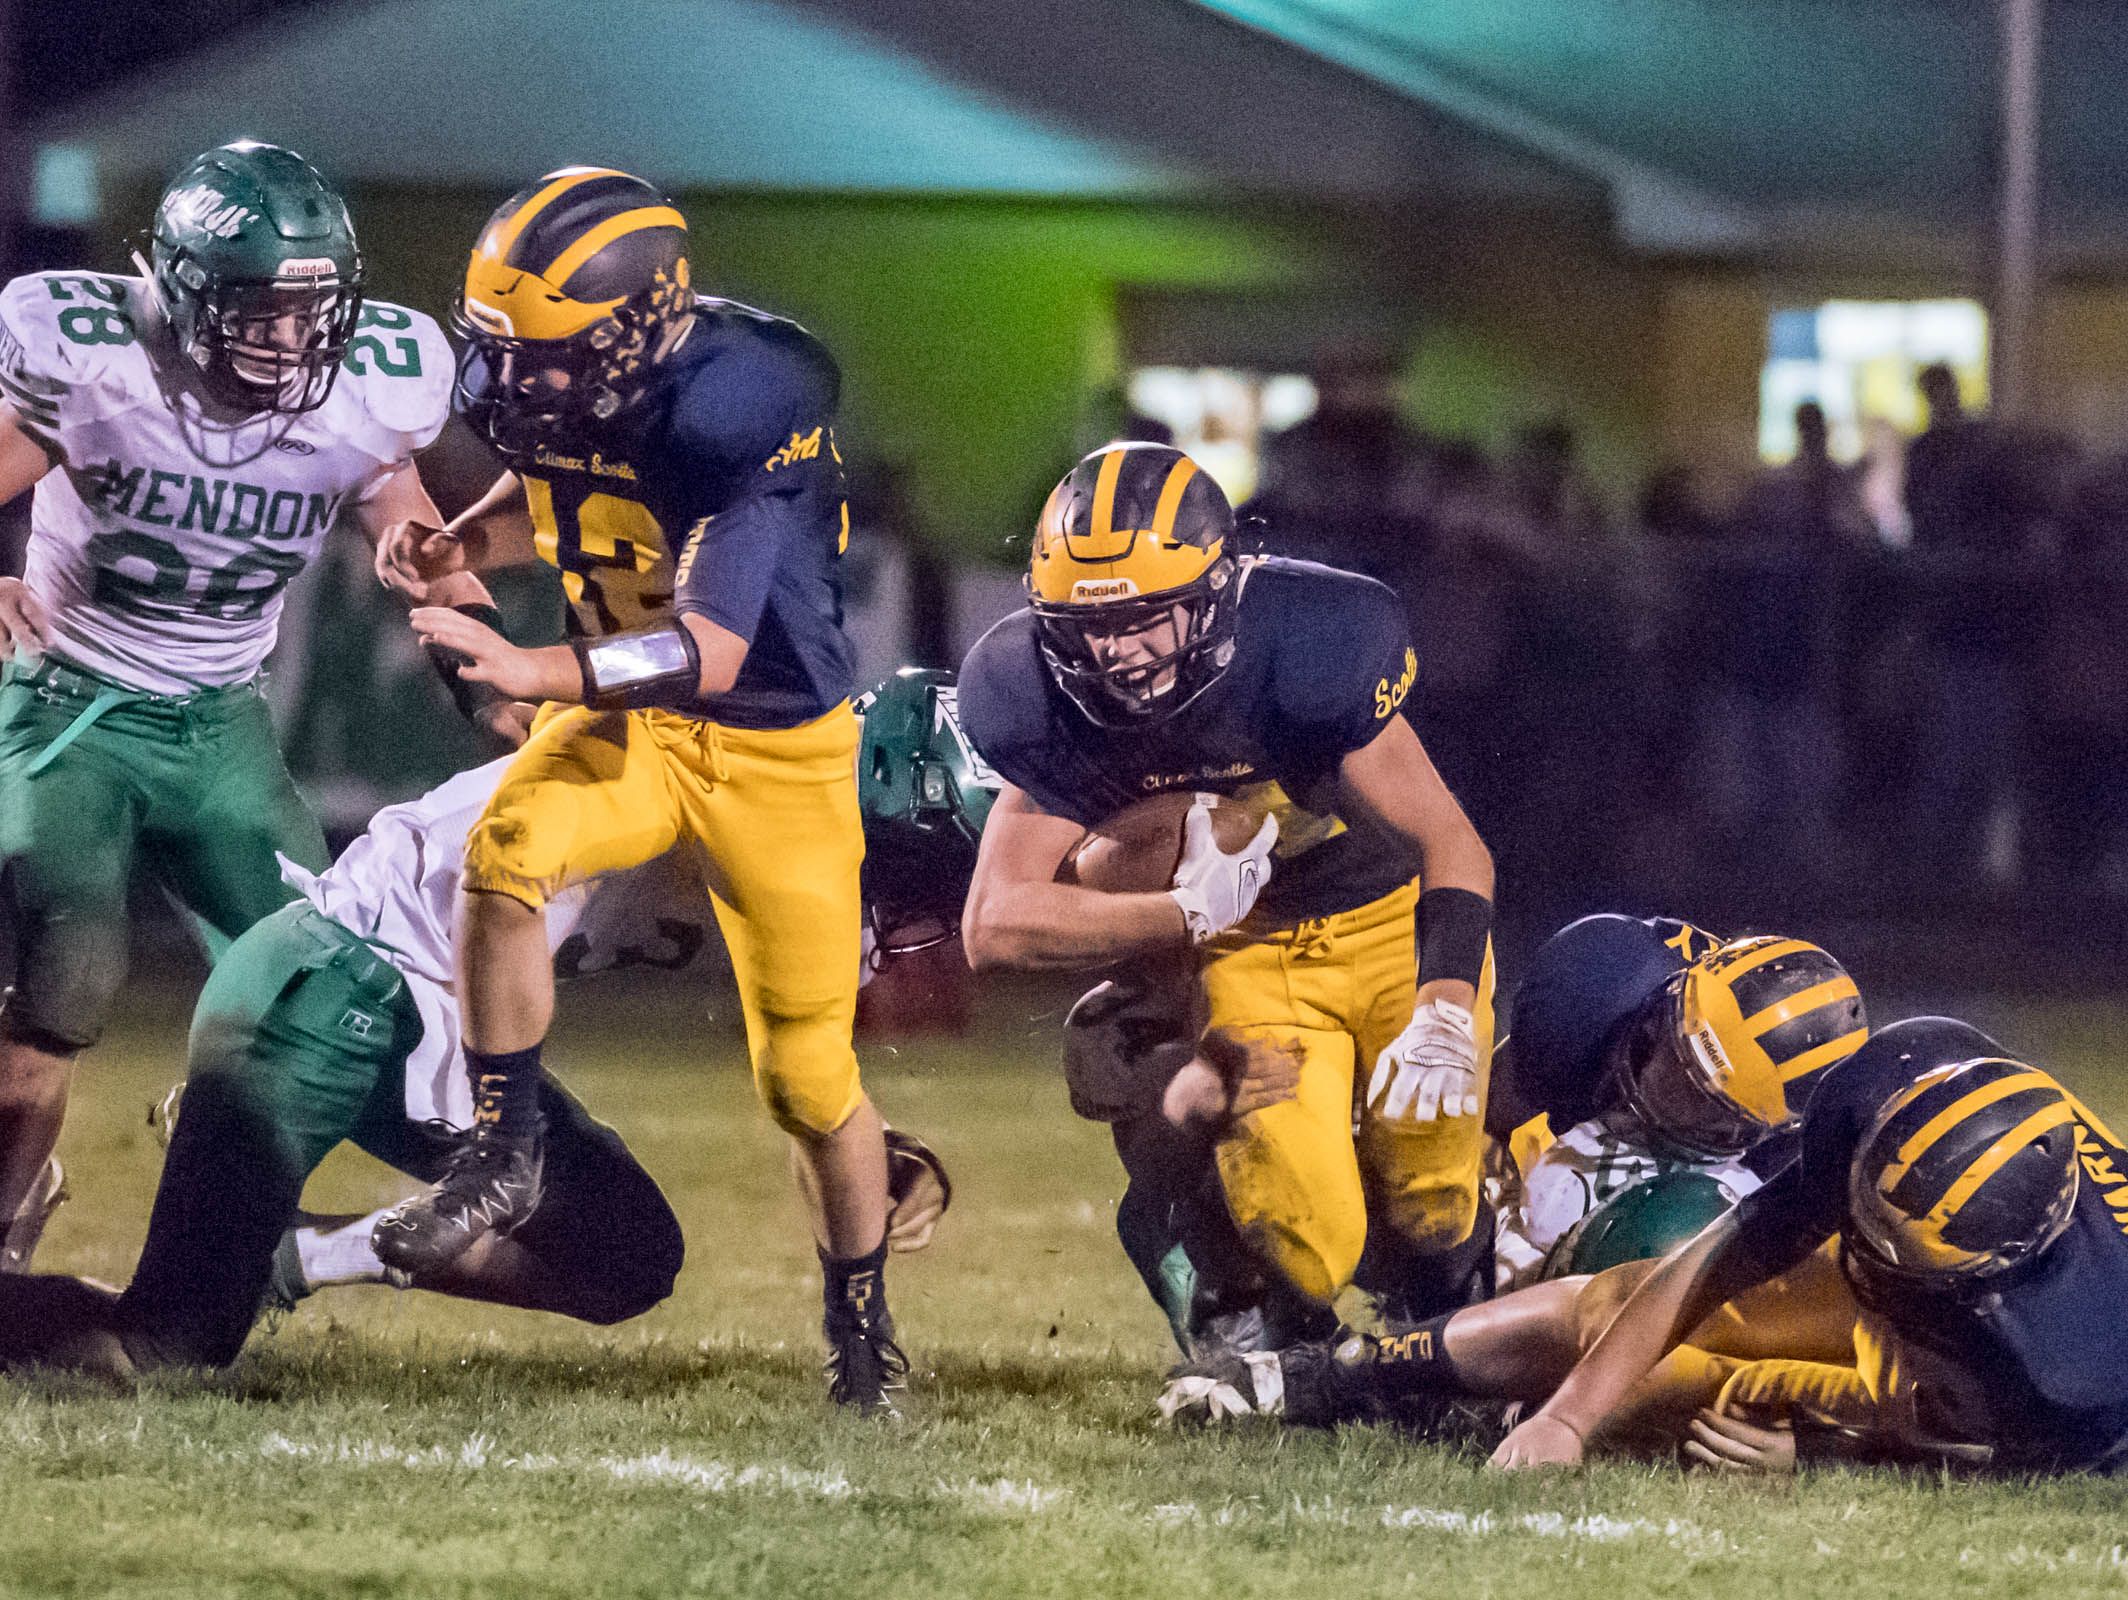 Climax-Scotts's Adam Schantz (20) grinds out for more yardage during first half action against Mendon in the second round of the playoffs